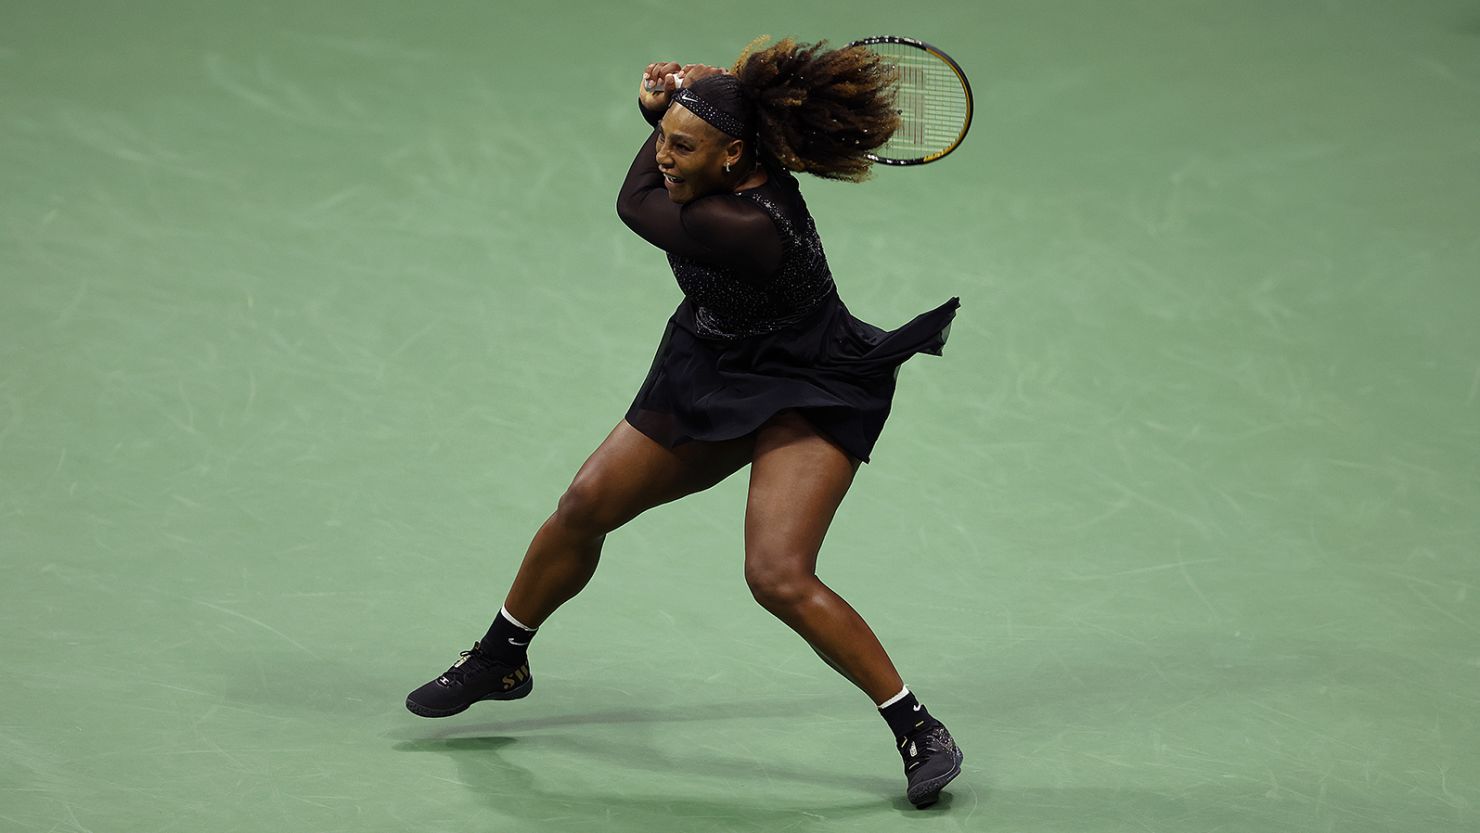 Serena Williams defeated Anett Kontaveit in the second round of the US Open. 